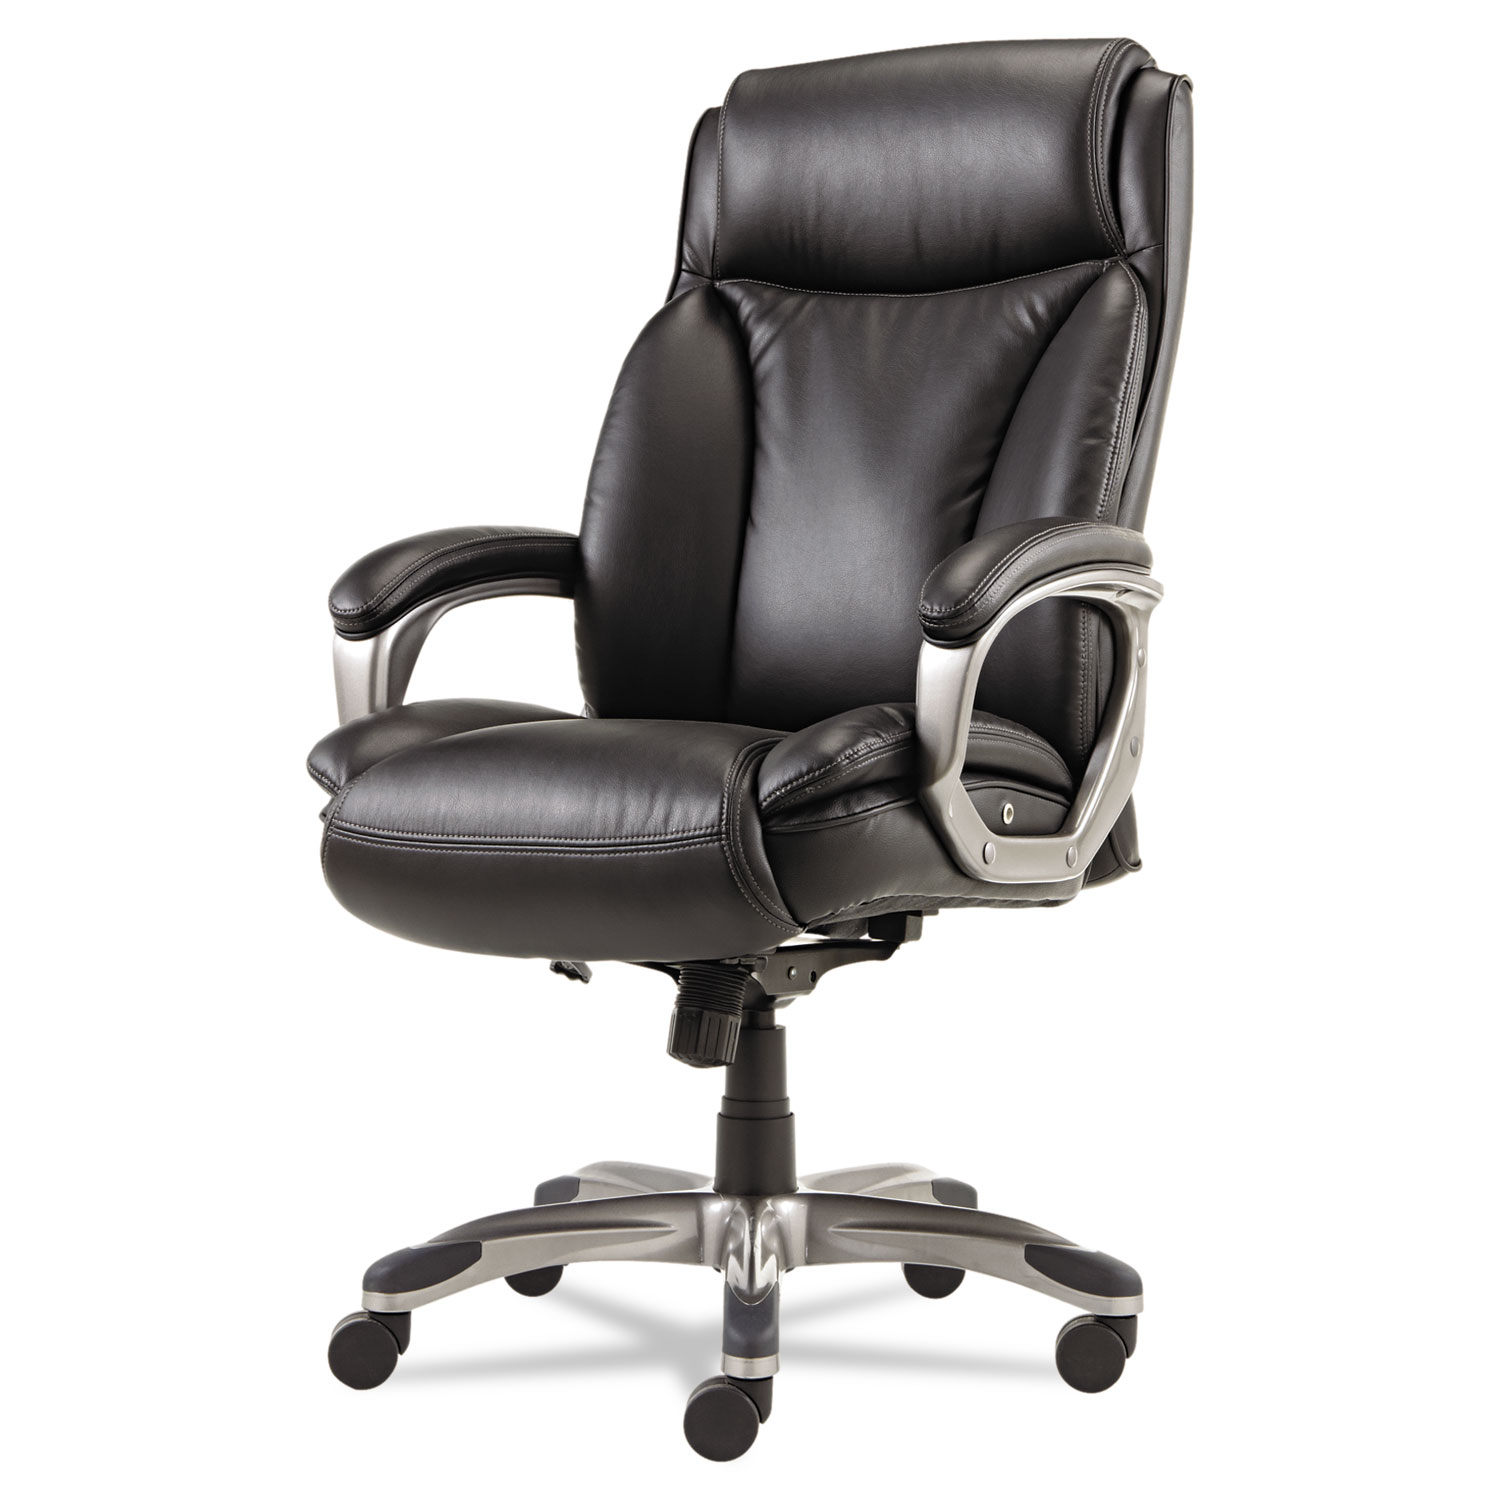  Alera ALEVN4119 Alera Veon Series Executive High-Back Leather Chair, Supports up to 275 lbs., Black Seat/Black Back, Graphite Base (ALEVN4119) 